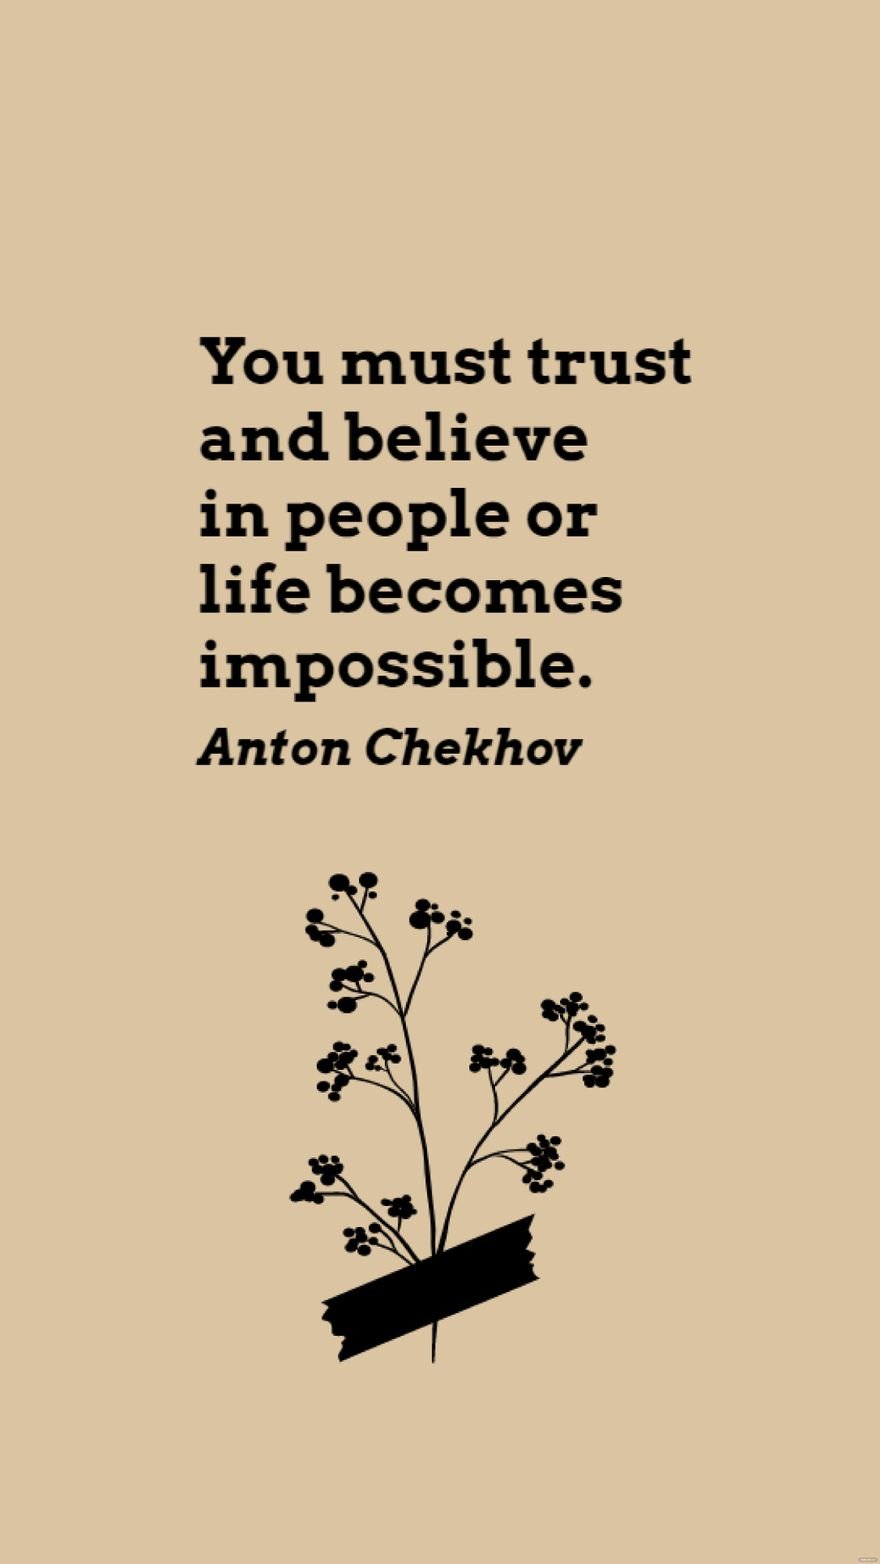 Free Anton Chekhov - You must trust and believe in people or life becomes impossible. in JPG